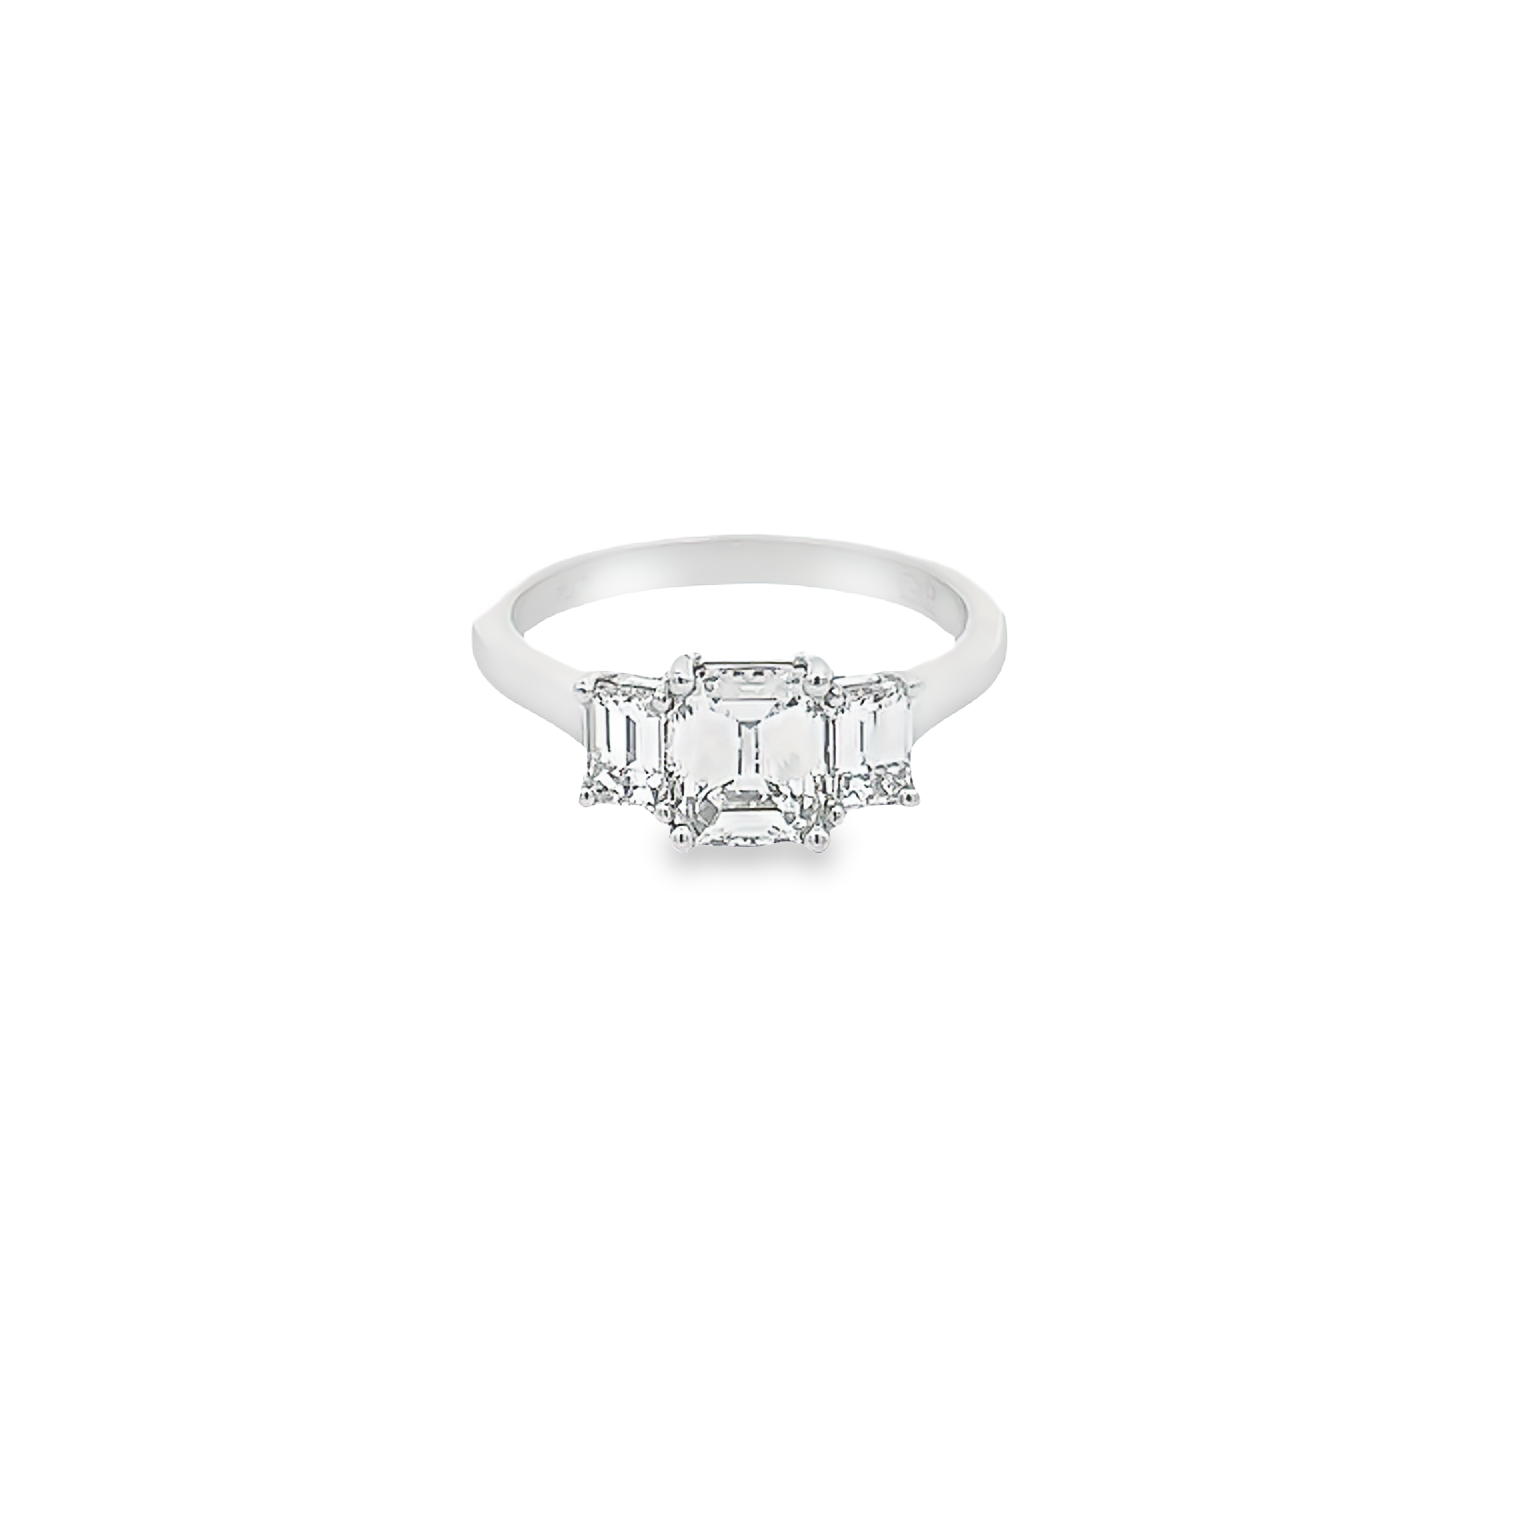 Platinum three stone engagement ring with One 1.02Ct Emerald G VS1 Diamond GIA 17259937 And 2=0.71 total weight Emerald F VVS  Diamonds